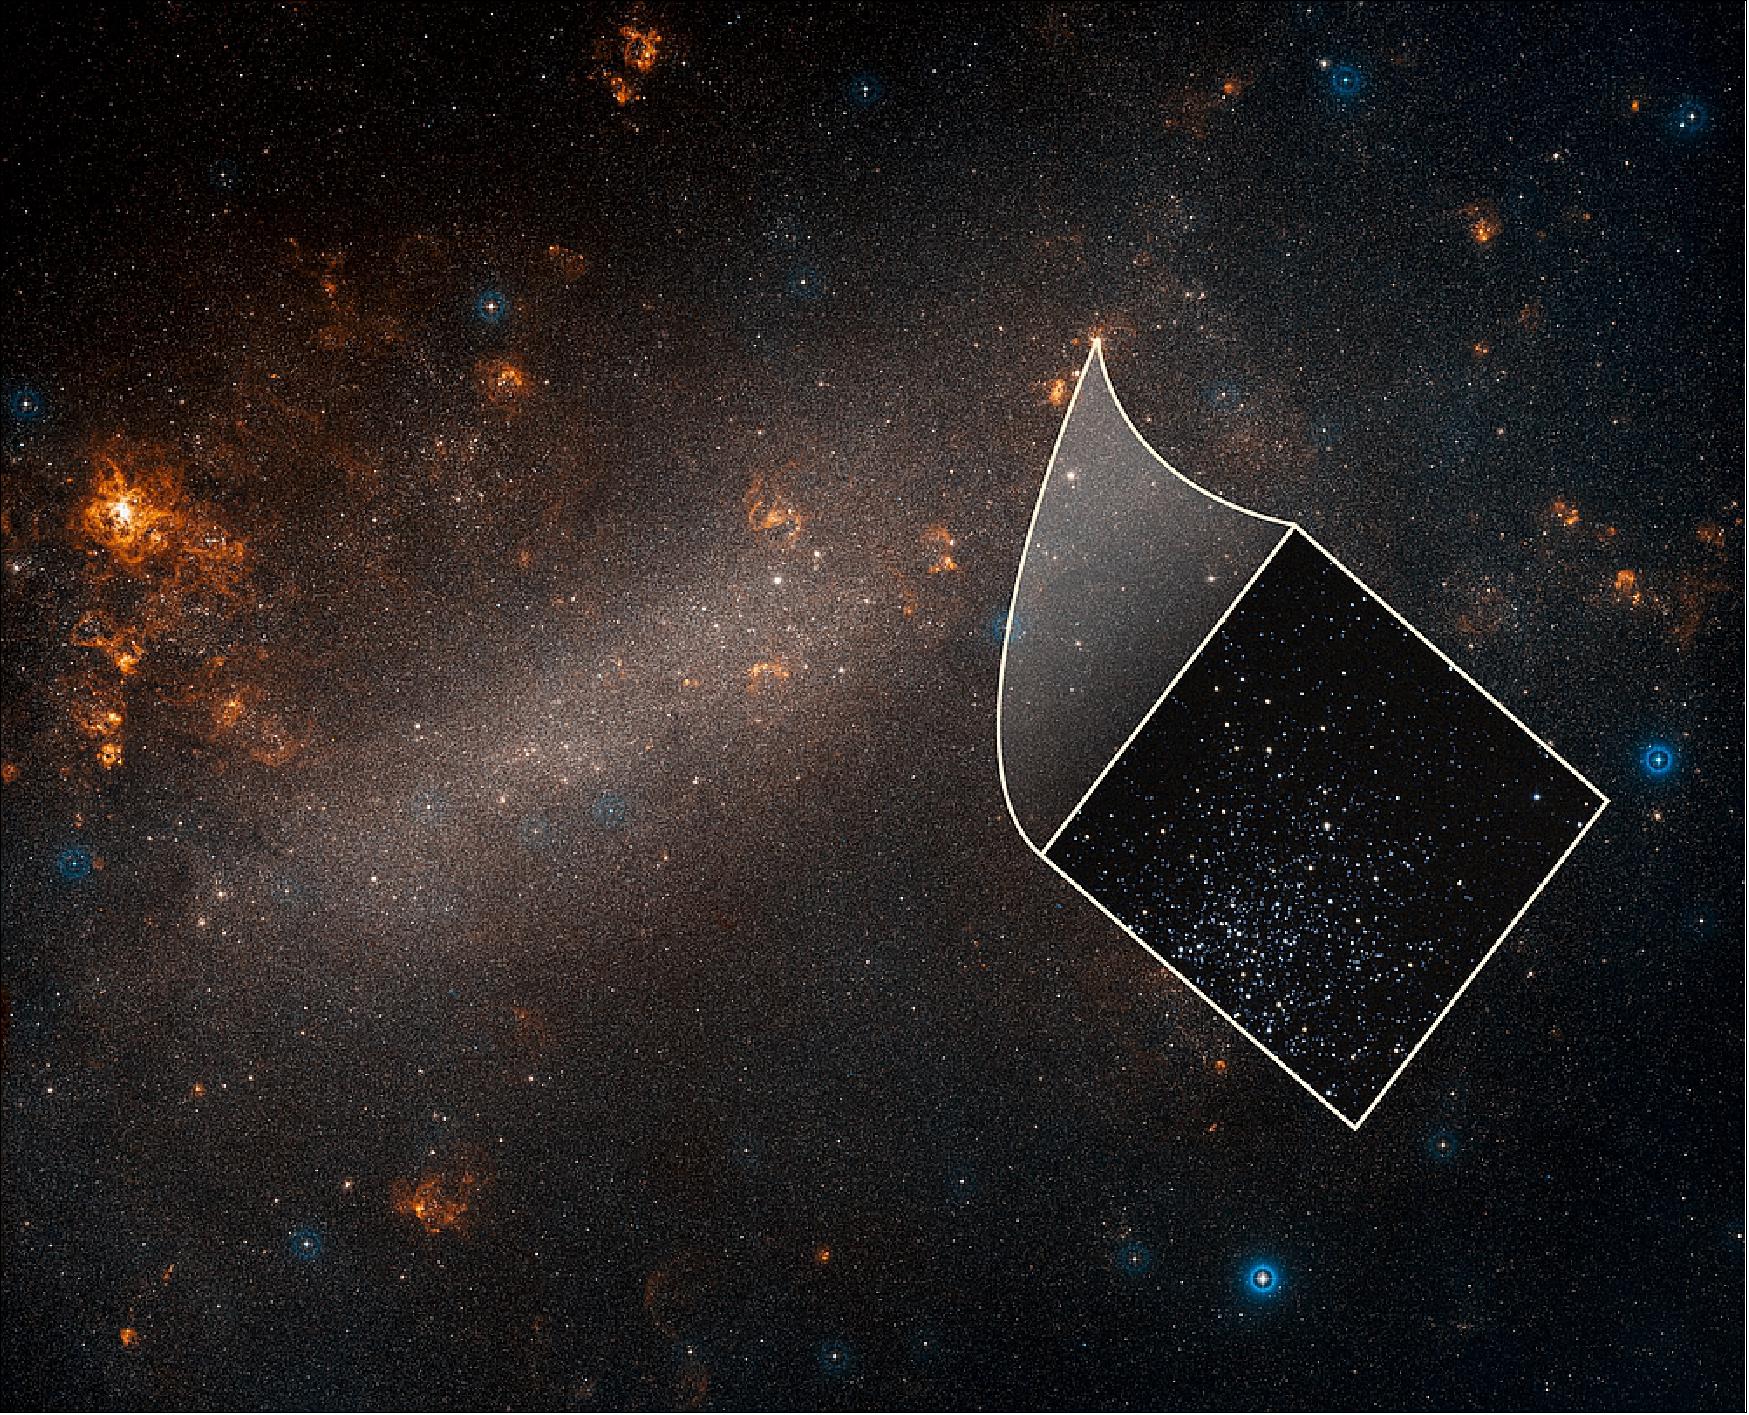 Bad Astronomy, Citizen scientists find asteroids in Hubble images